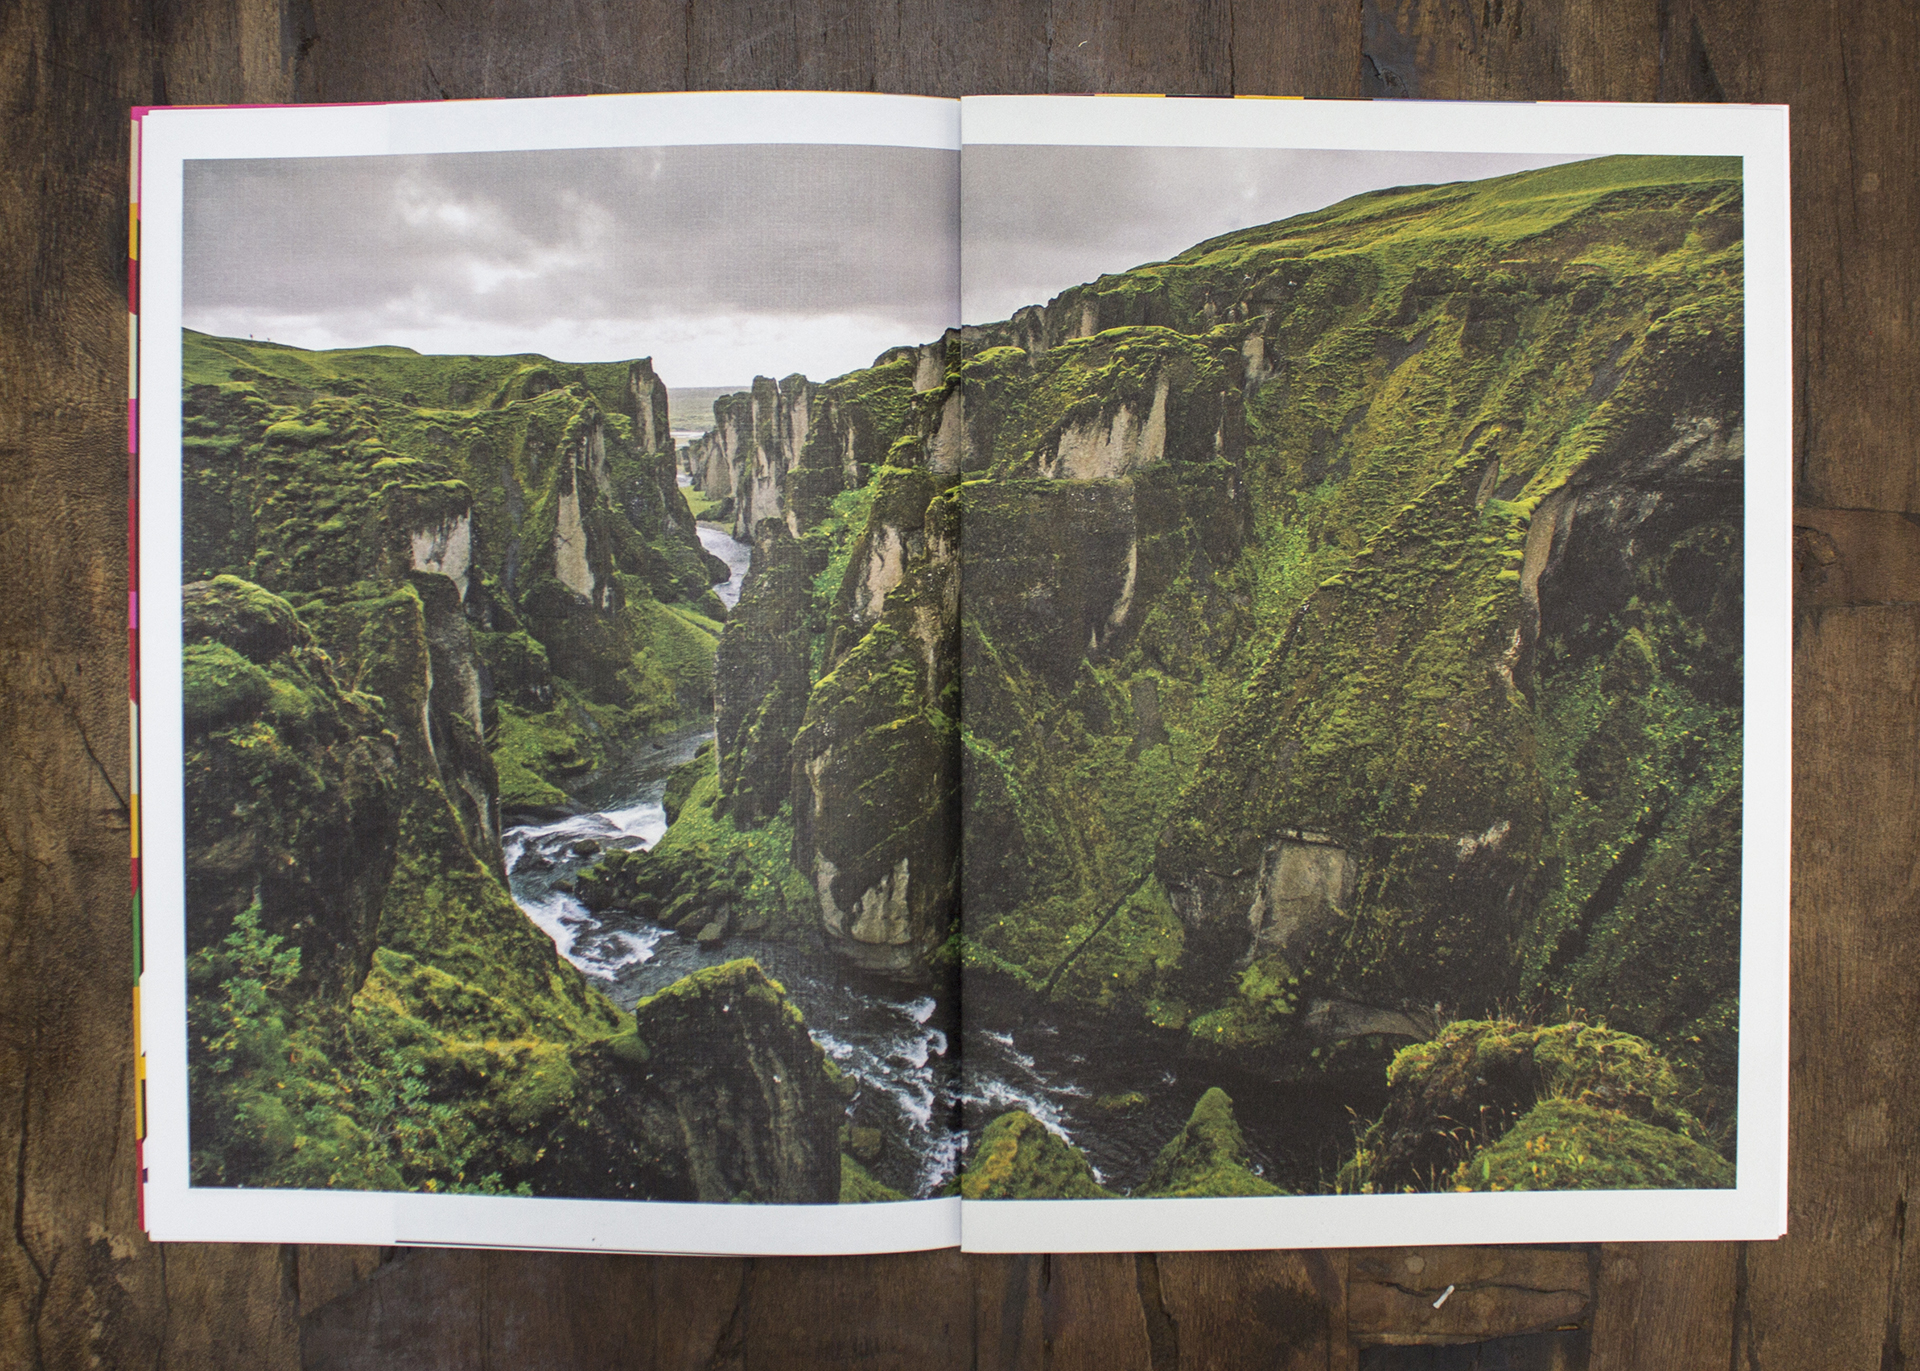 A two-page photographic spread in the Maker Quarterly